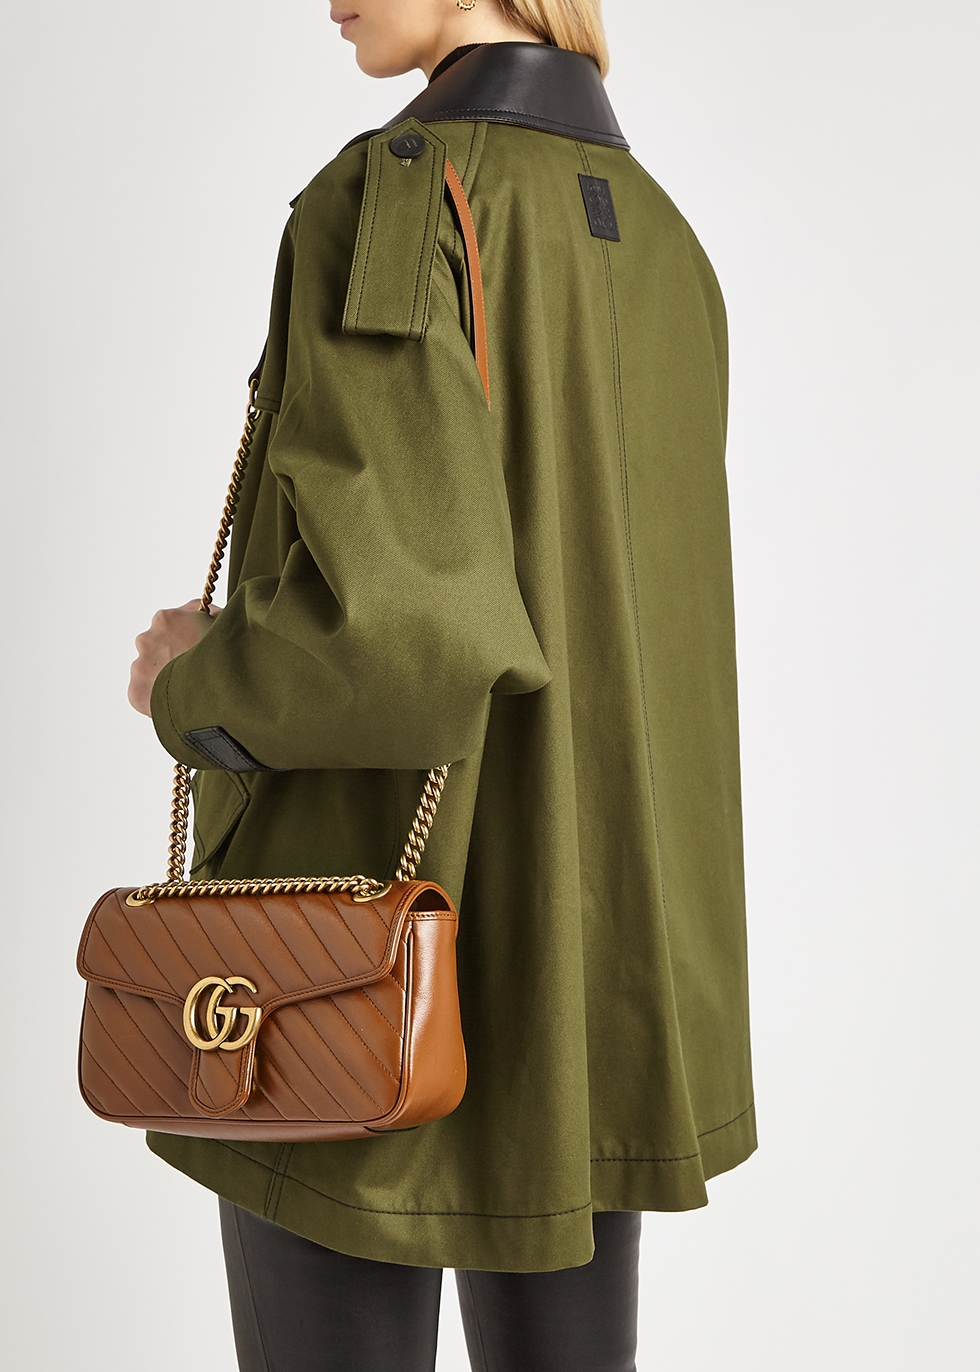 gucci marmont brown bag